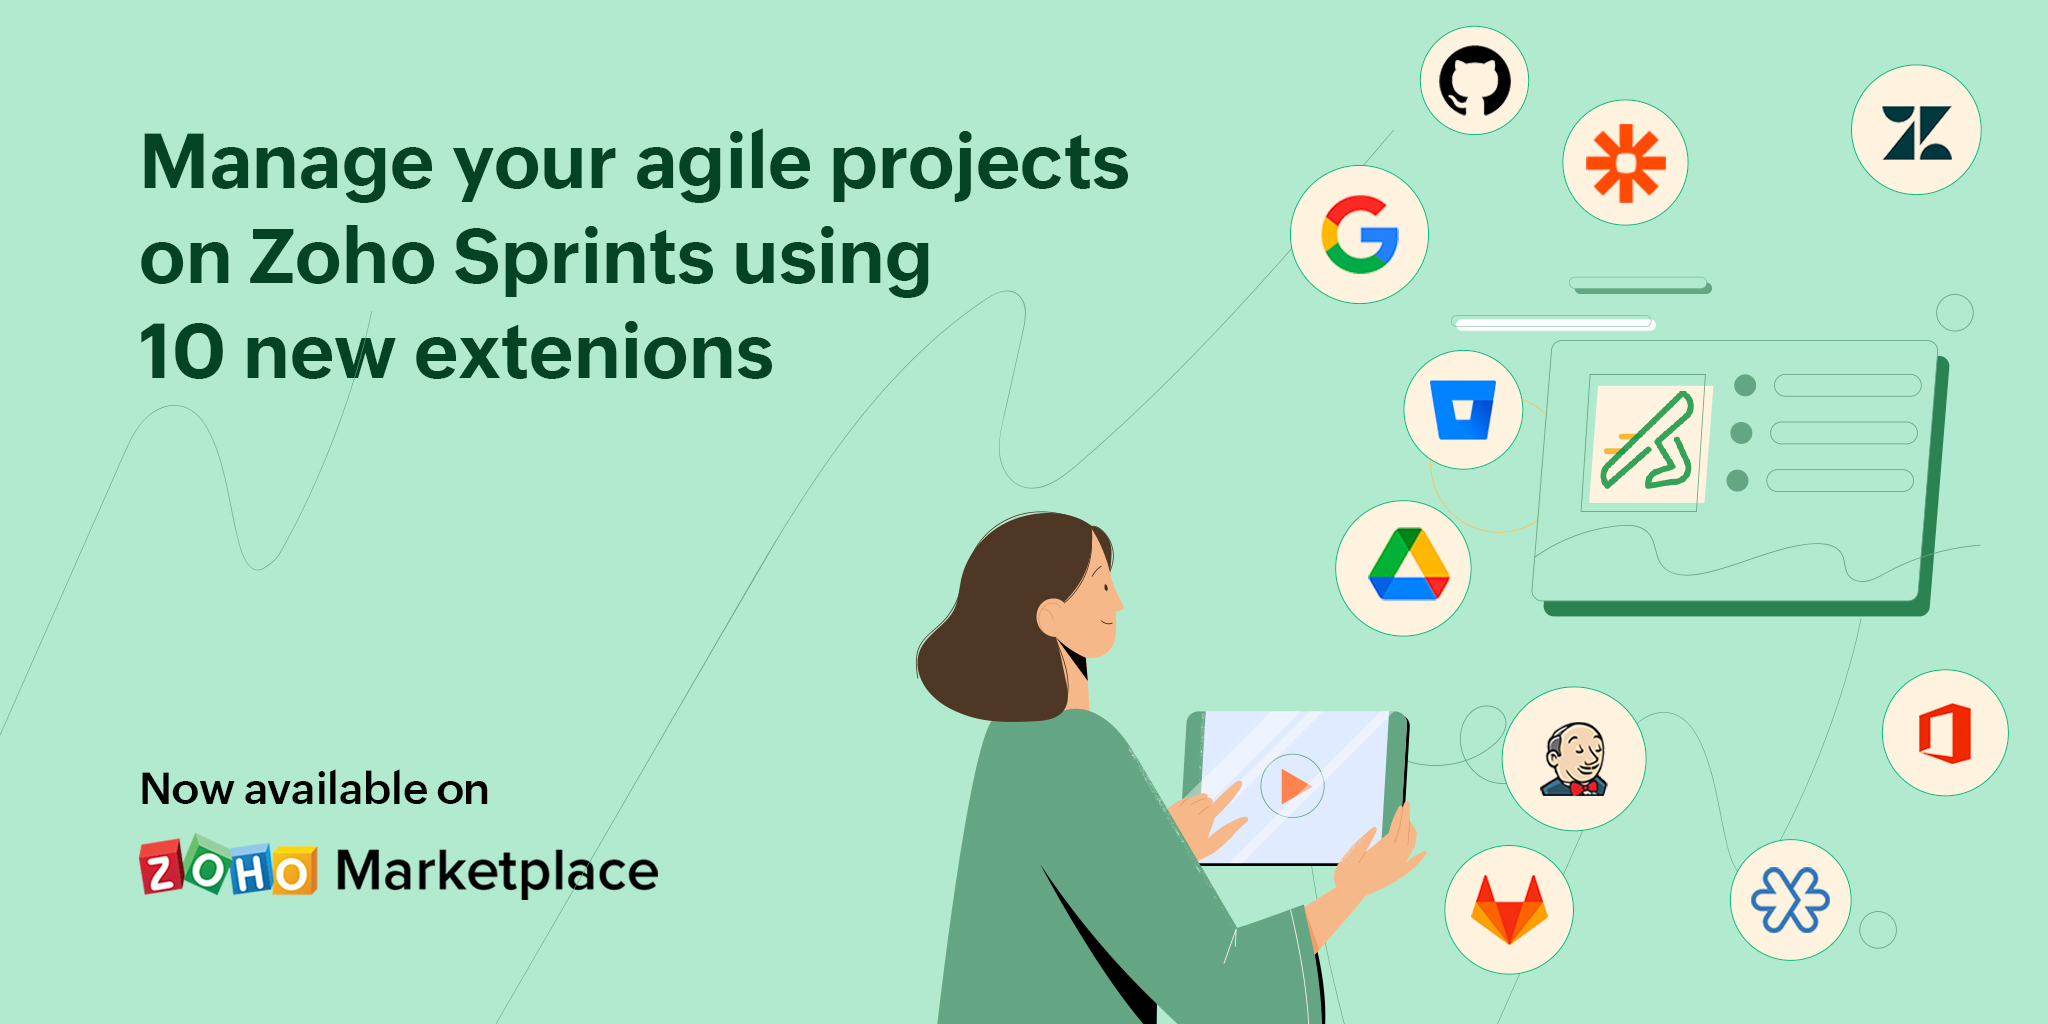 Introducing Google Drive, Zoho Meeting, Zendesk and 7 new extensions for Zoho Sprints